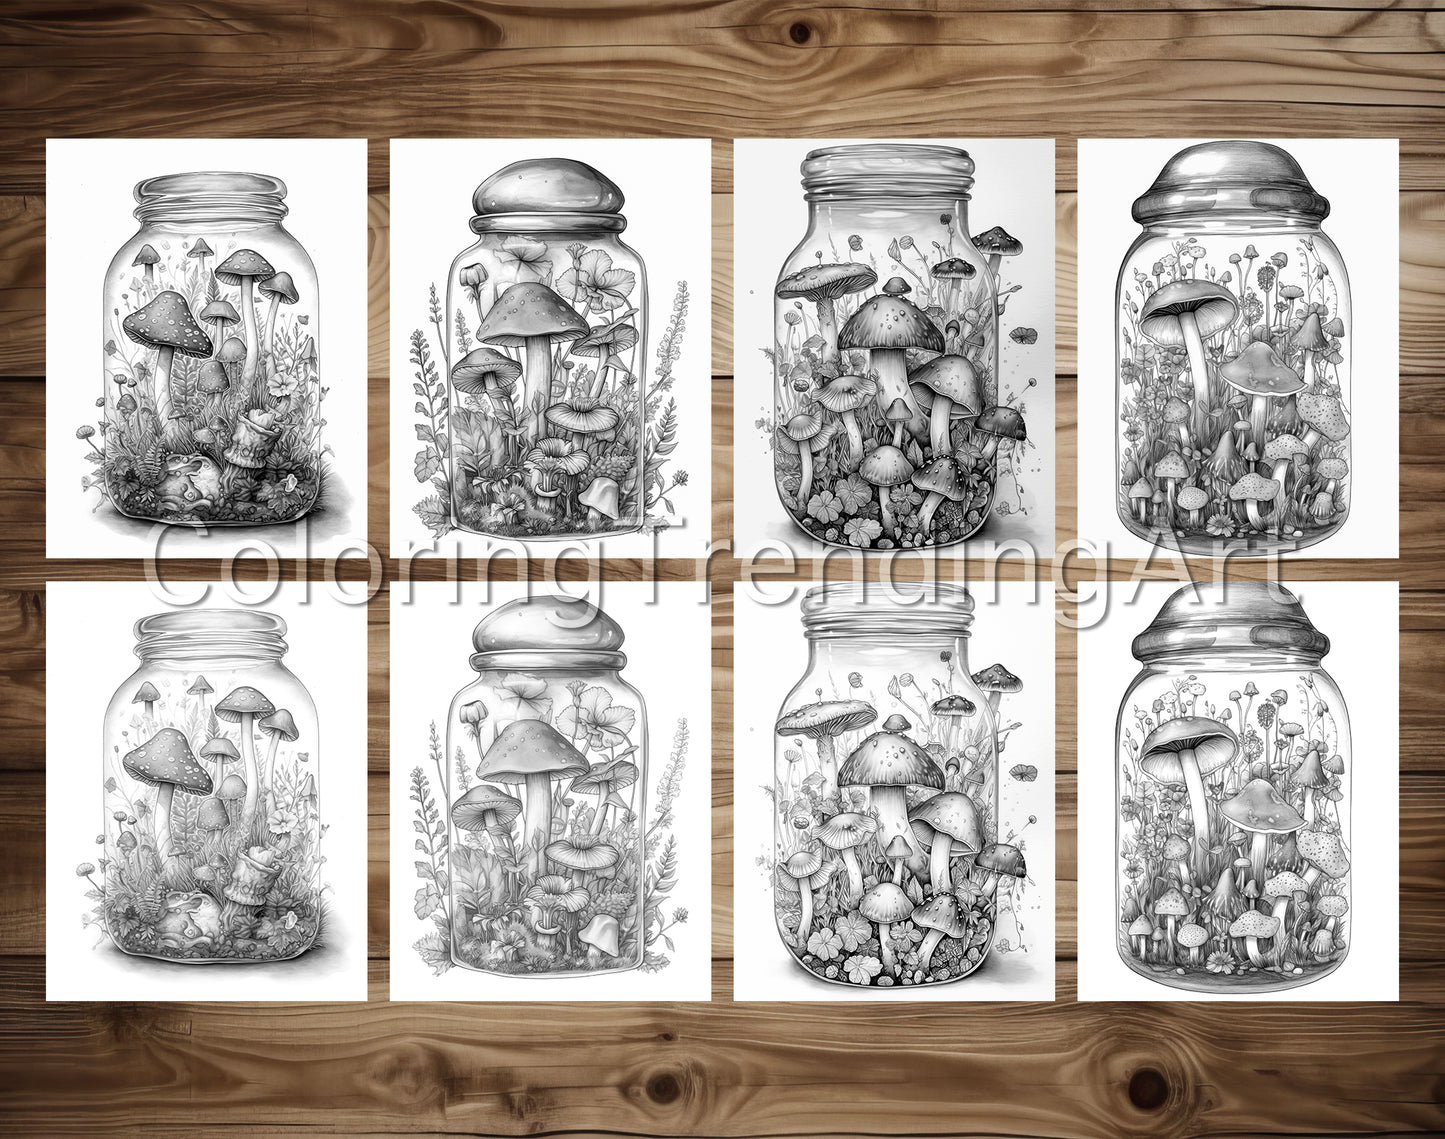 25 Mushroom Forest In Jar Grayscale Coloring Pages - Instant Download - Printable Dark/Light